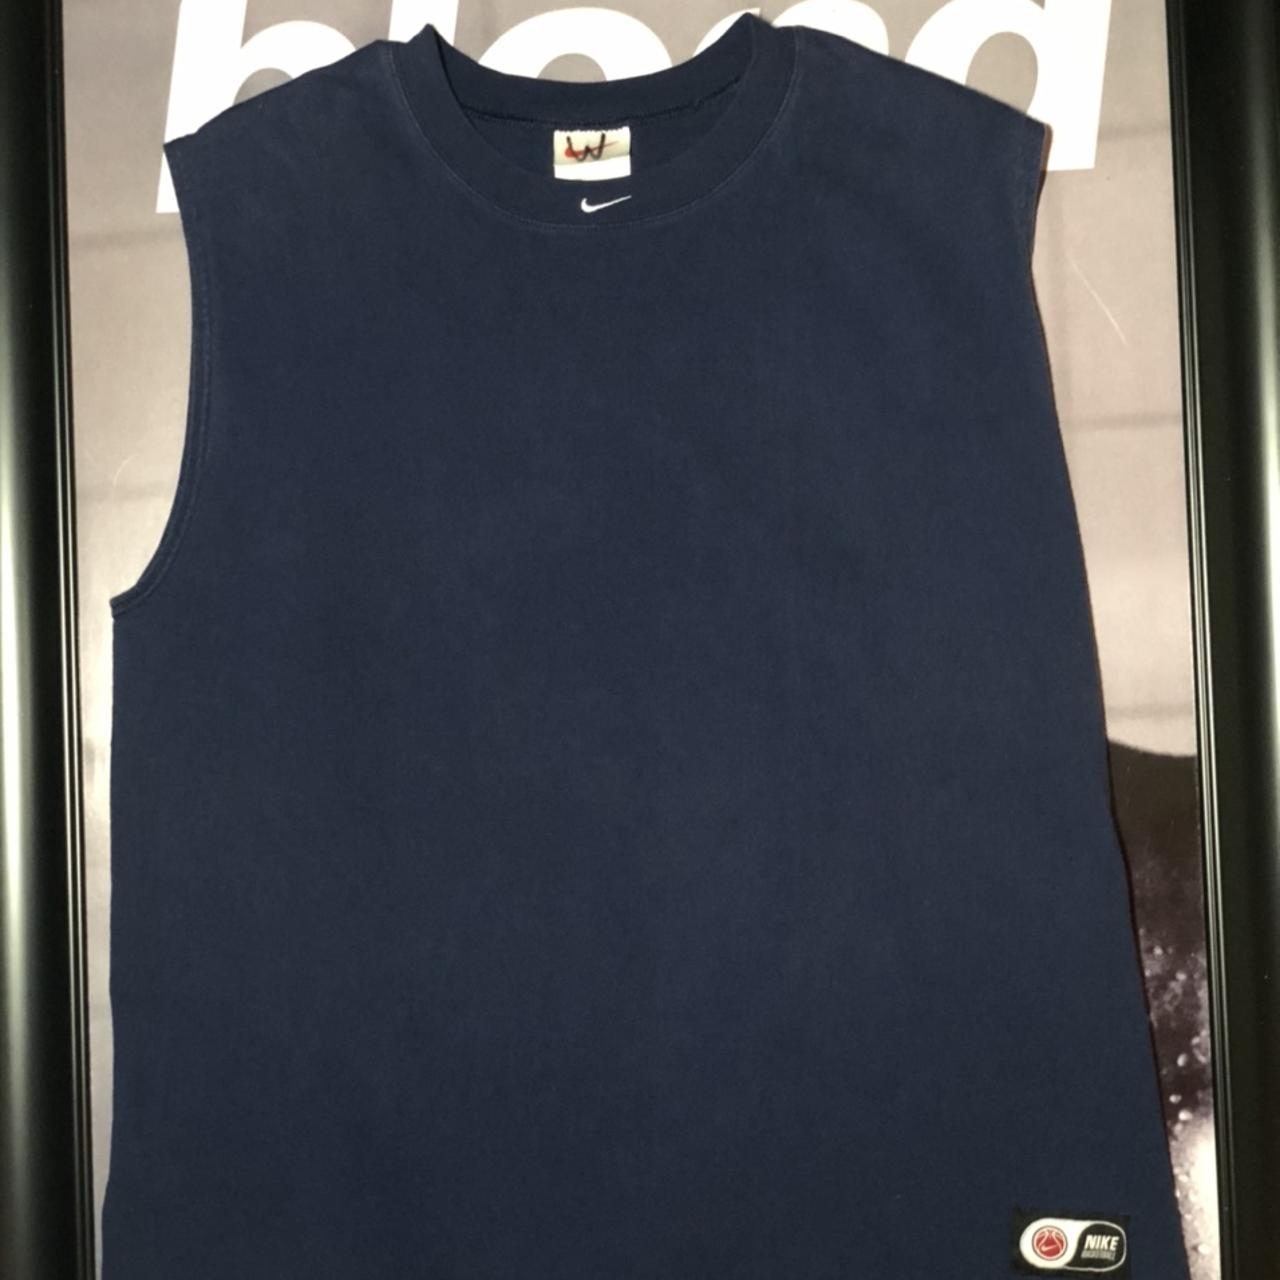 Product Image 1 - 90’s Nike Center Stitch
Tank Top

Navy